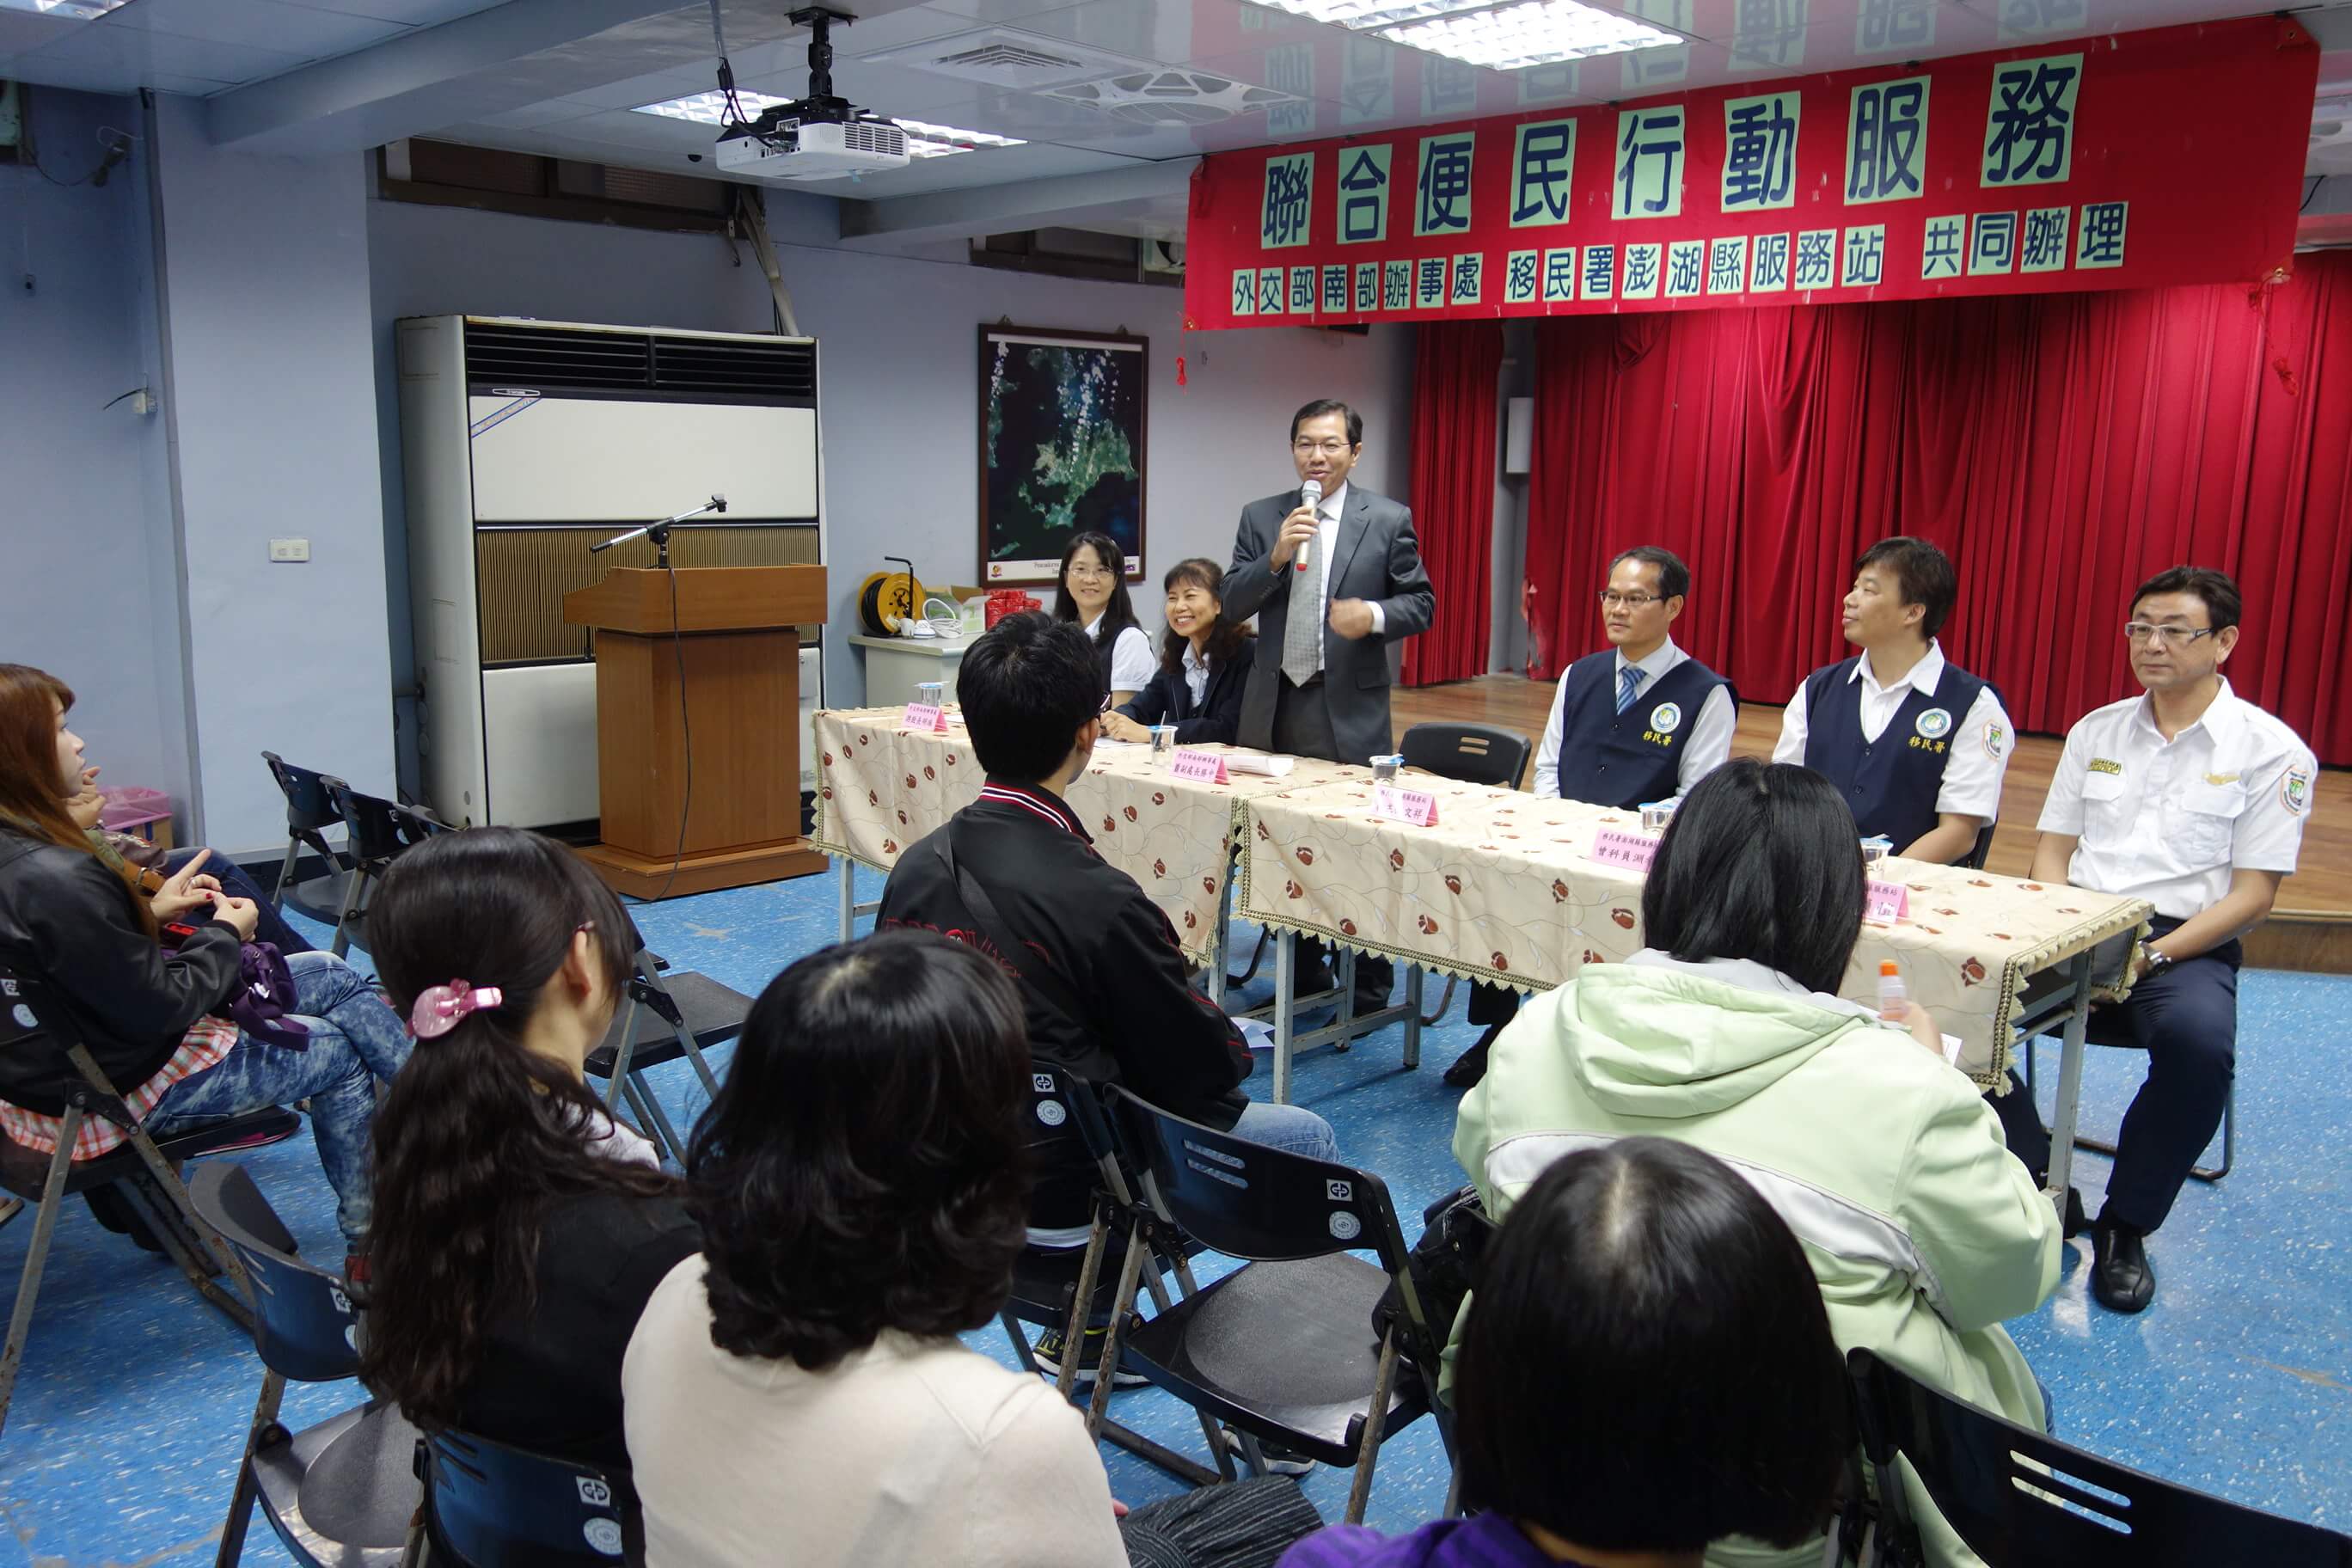 Consular Officers from Southern Taiwan Office, MOFA Visited Magong City, Penghu County in Offshore Island to Provide Consular Services on May 1, 2014